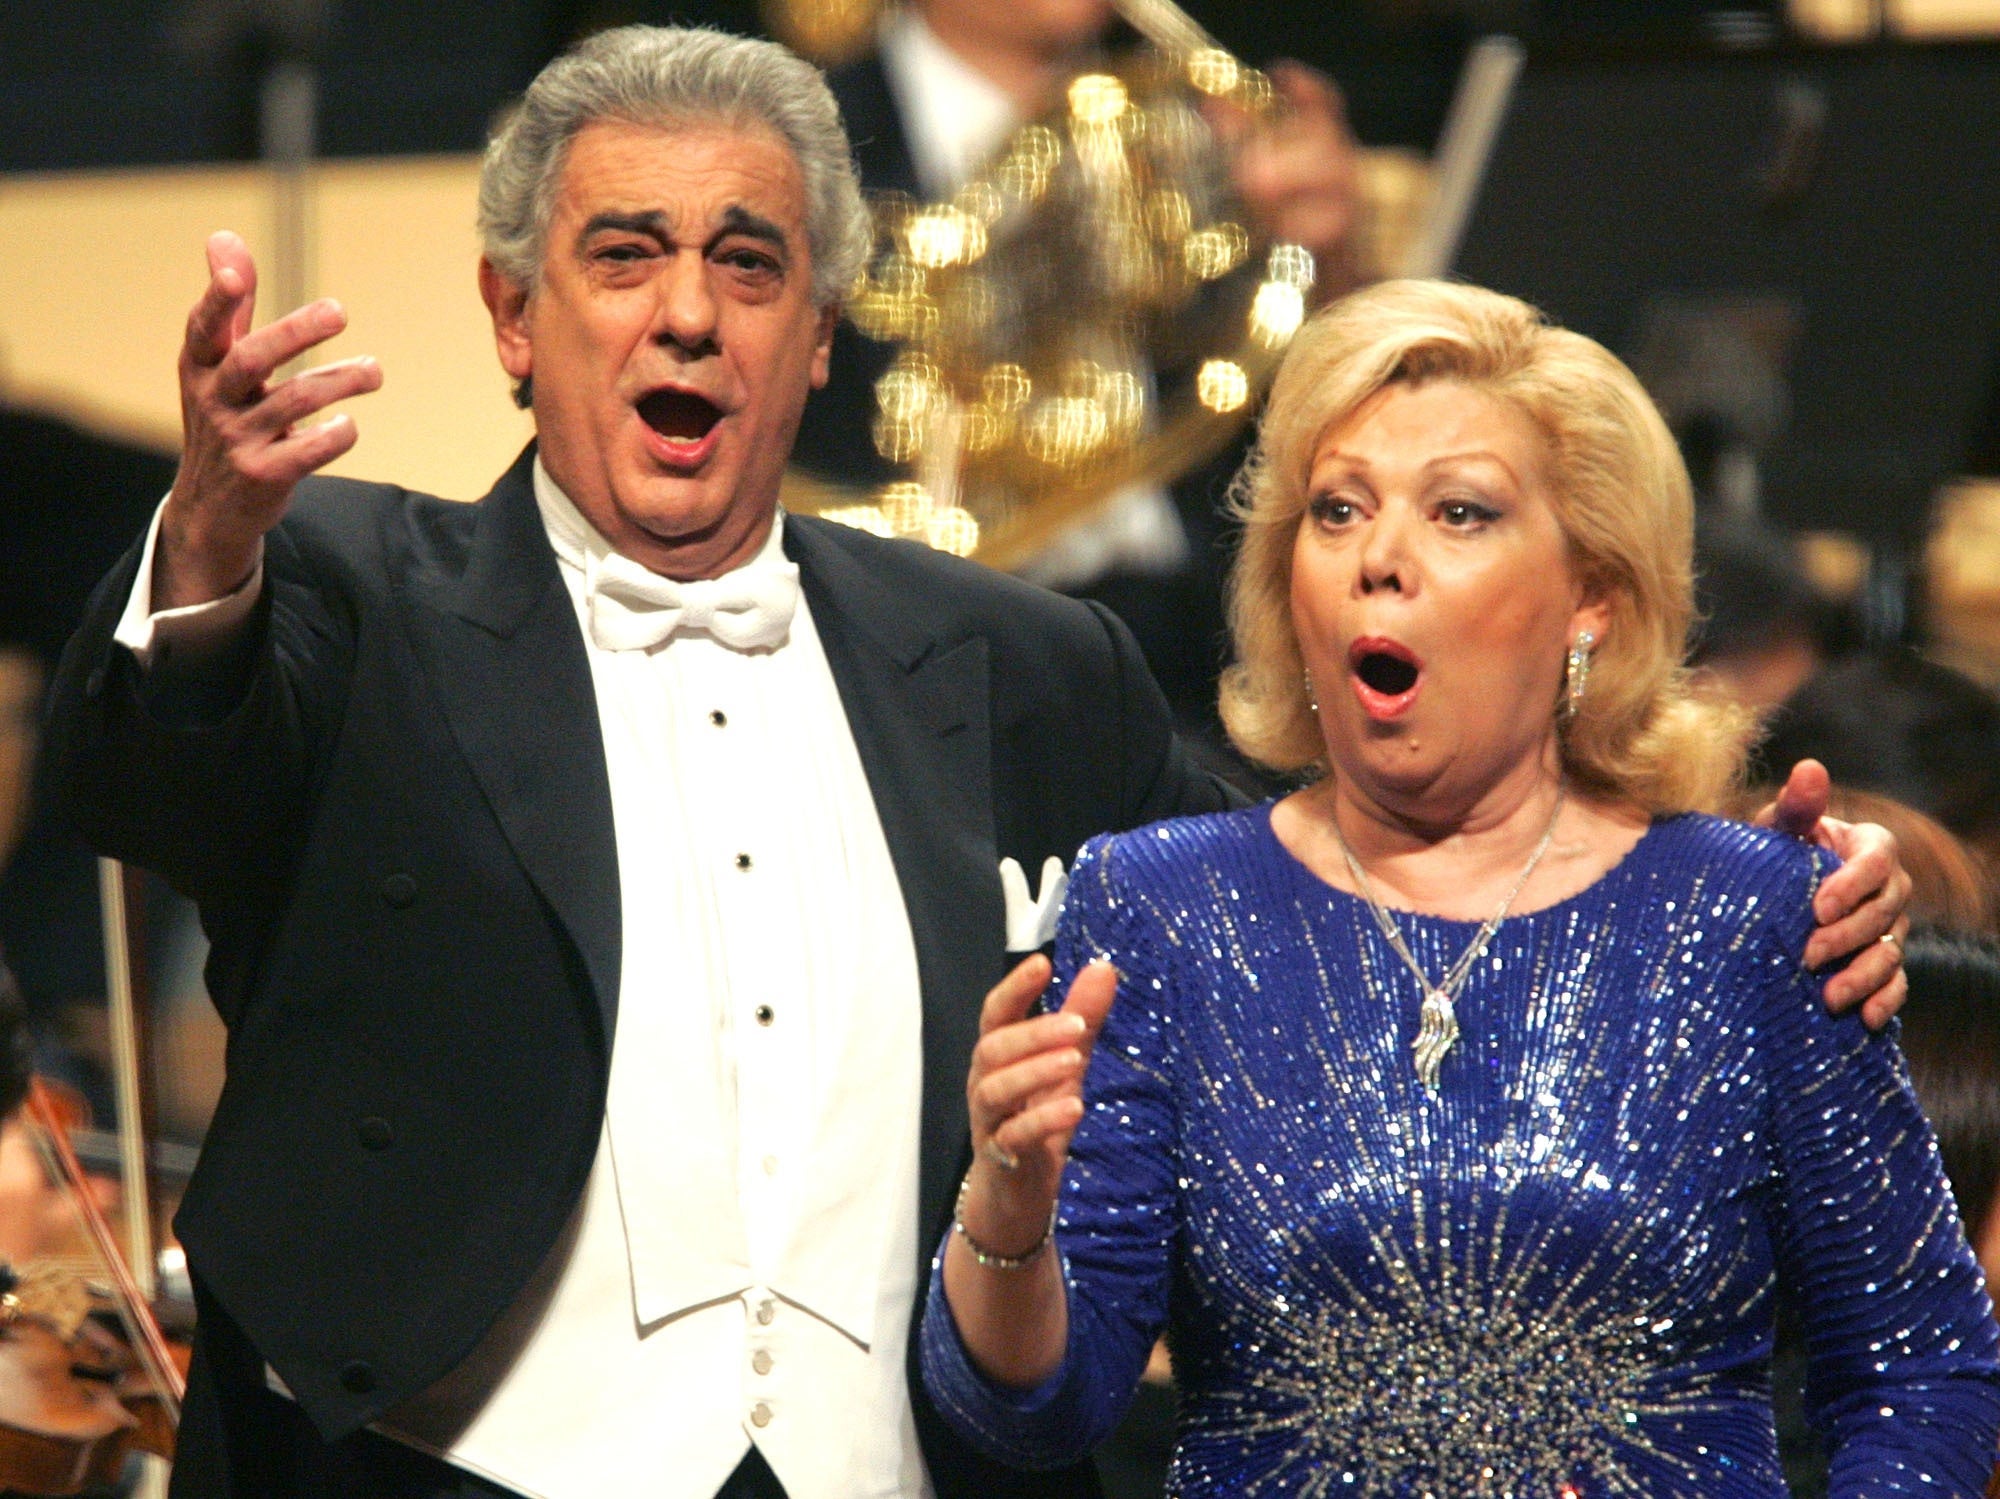 The opera singer at a Tokyo concert with Placido Domingo